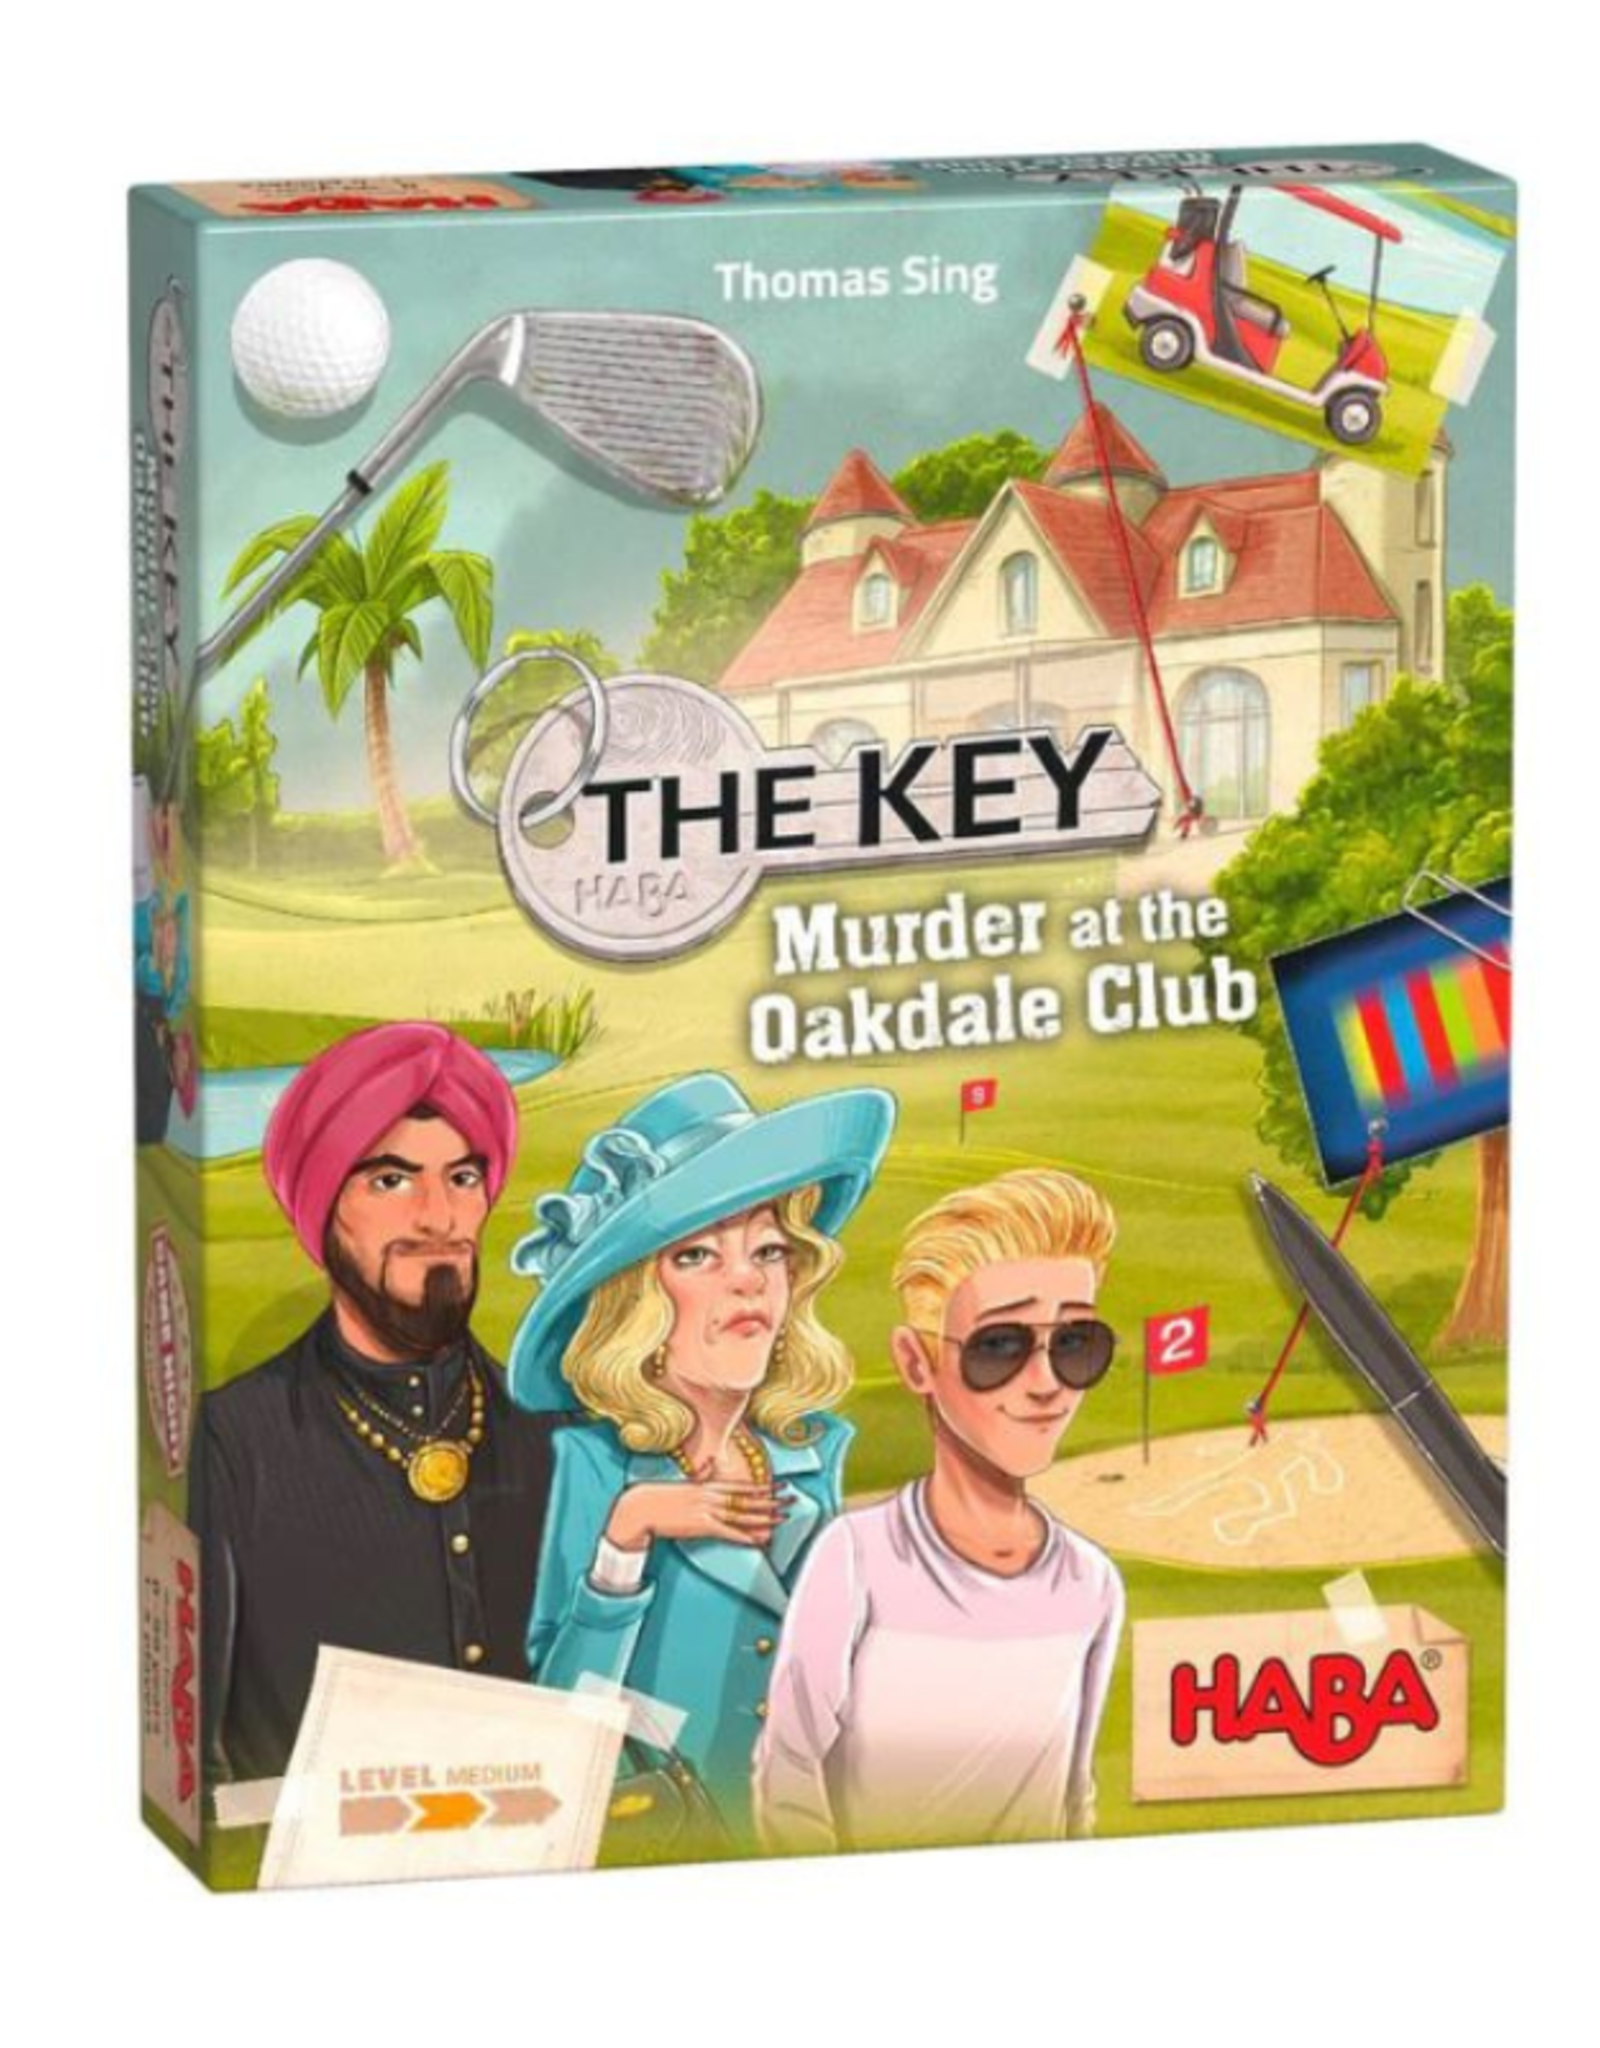 The Key: Murder at the Oakdale